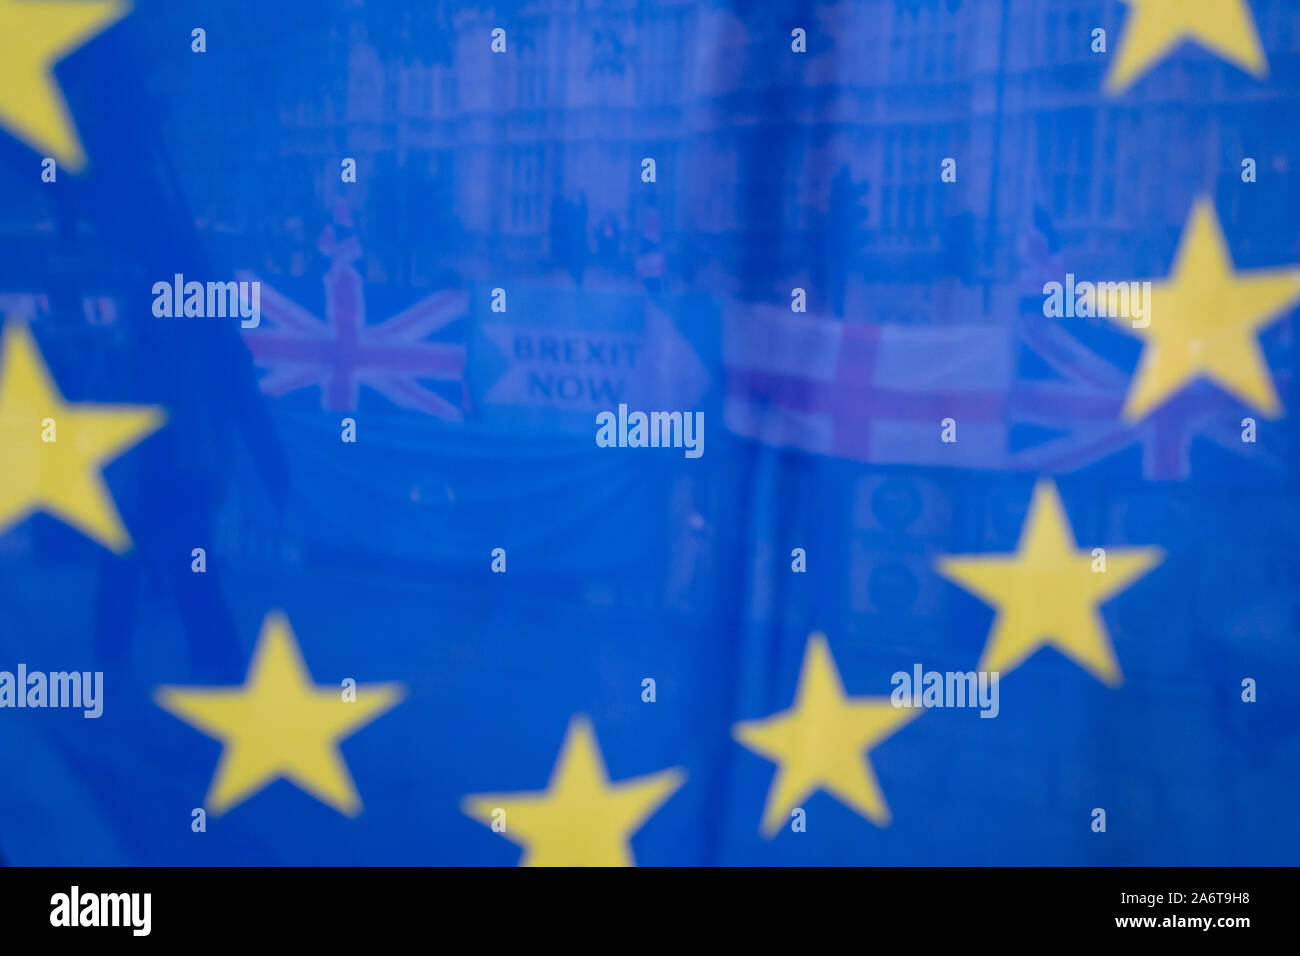 On the day that the EU in Brussels agreed in principle to extend Brexit until 31st January 2020 (aka 'Flextension') and not 31st October 2019, Brexit Party flags and banners are seen through an EU flag during a Brexit protest outside parliament, on 28th October 2019, in Westminster, London, England. Stock Photo